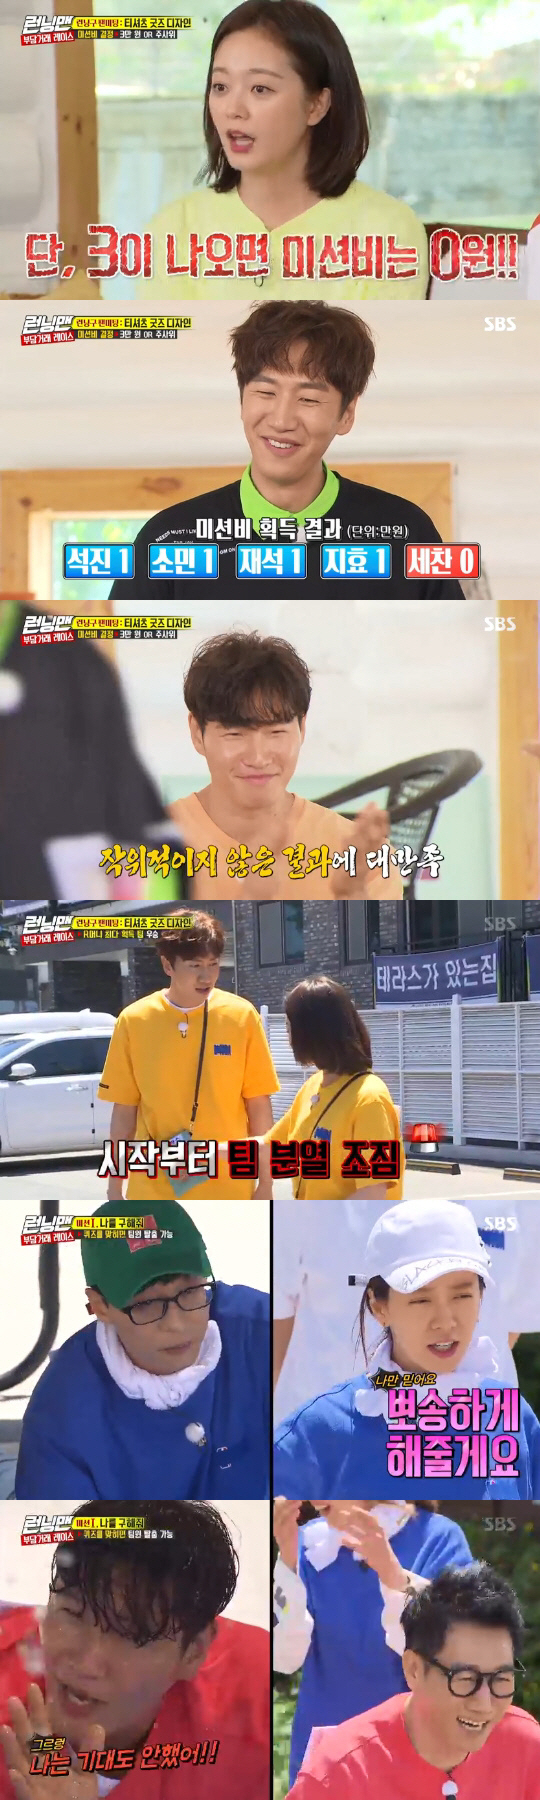 <p>2 days afternoon broadcast of SBS Running Manin the running of a T-shirt design to determine the run tool Project 3 - Tan- good size Raceas it unfolded.</p><p>Running Manin this summer to be held Love Without Love (Live at Summer Vacation/08 come to the fans for presents Running Man Good Days running T-shirt 3 ceiling anyway? Running T-shirtsdesign this day good size Race winner of the design as is.</p><p>Members of the authentic Race before each of the winning productions would like to T-shirt design directly painted. Amount more like himself, except for all the members of the toad made a simple(?) Design more than anything. Stone is, as no one is alone, but Sherlock Holmes became a design with members of the blind blame received. Yoo Jae Suk is the Avengersand the Palace of artof the collaboration that emphasizes the design was, and Kim Jong-kook is a jigsaw catching a tigeris a topic with outstanding painting skills and was proud. Or this tour the number of members of his staff, put that painted a picture, and a small members texture or painted Design, Your said. One of the members handling that anger in to the picture again and to all members as a point representation for a laugh, I found myself in. Only Song JI Hyo anyone Running Mans heroine can beis a brilliant idea containing design information by members received recognition.</p><p> This day, design the protagonist to the burden or Raceis a 2-in-1 as a team that progress in Race to land only to choose well if you can win that Race. The final R mother a lot of teams to win the Championship, and the winning team one final win along with the design rights to us. Enamored bracelet team two members of a group with a T-shirt of the back hip portion to place a face to sit on hips hardwood this is a totally humiliating punishment receiving.</p><p>One team will support the analysis with Kim Jong-kook, Yoo Jae Suk and Song JI Hyo, haha and sheep more comfortable, this light and place people on each team is given 6 in the land of gold 7 and Quang 2 freely deployed.</p><p>The gold bullion acquired and a meal ticket, it takes the first mission is the time limit of 100 seconds Trivia Challenge team trivia to meet other team members water bombs you have to avoid the thing. Different teams and different seats and Kim Jong-kook is a win, regardless of standing as a complete(?)To Koch. Especially silly because of water bombs to the right Kim Jong-kook is this mould is Meet have no idea there. I also saida few days molars tight, biting the team members and the support seat with a water bomb for a bomb was.</p><p>In the finals that Yoo Jae Suk - Song JI Hyo and HaHa - two more as the team met. Yoo Jae Suk - Song JI Hyo, Lee Kwang-Soo - ago loss people to take help of won the championship. However, the two winning benefits land pulled in ahead of the appointment will be with your car without the options - the min to ship your gold until one has obtained.</p><p> Meanwhile, the members of the mission are briefly Devote and Love Without Love (Live at Summer Vacation/08 in the showcase group dance ready for the world-choreographer Leah raised and met. Members think more complex choreography in really did not. This in the Liao scheme is a celebrity five level fit in there. They feel prepared tobe the action as techno healthy inside put. Then if you can,he explained. But members this was a miracle,said full of worry look.</p>